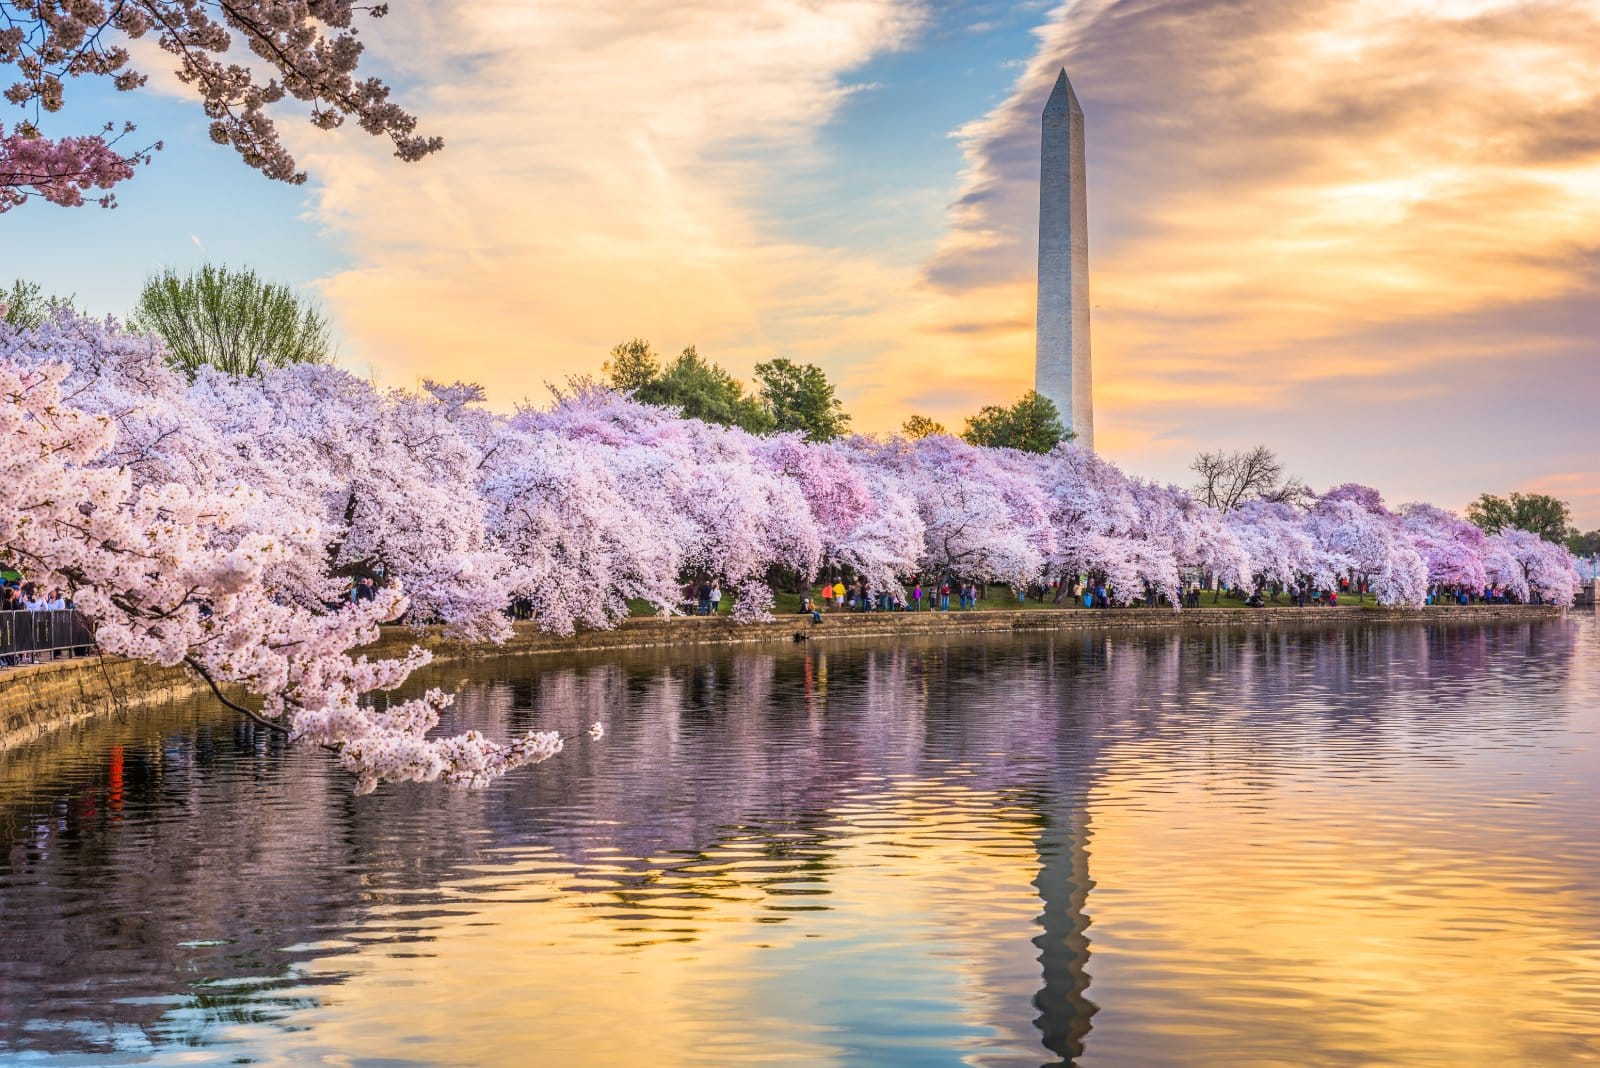 <p class="wp-caption-text">Image Credit: Shutterstock / Sean Pavone</p>  <p><span>Experience the full range of seasons, from New England’s fall foliage to the spring cherry blossoms in Washington D.C., each offering its own form of natural beauty.</span></p>